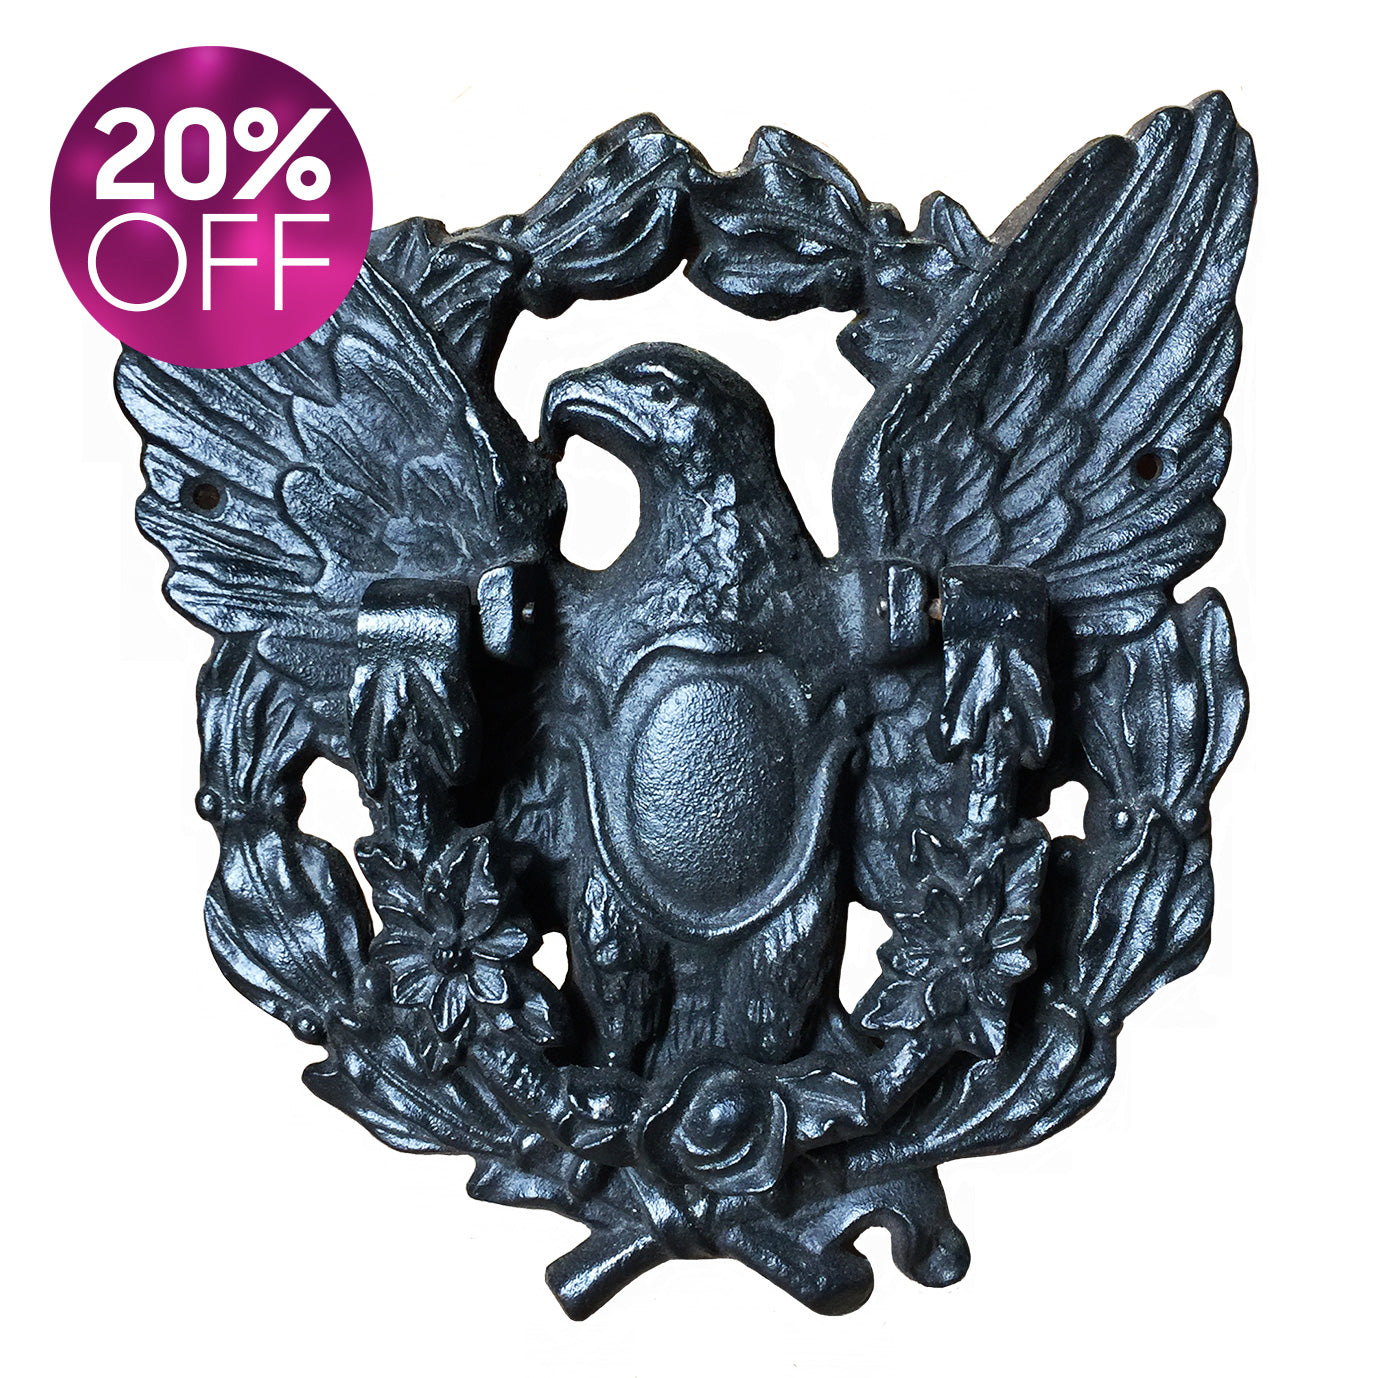 Black cast iron regal eagle door knocker. This very proud eagle sits adorned with a bouquet of flowers that forms the knocker section - SHOP NOW - www.intovintage.co.uk